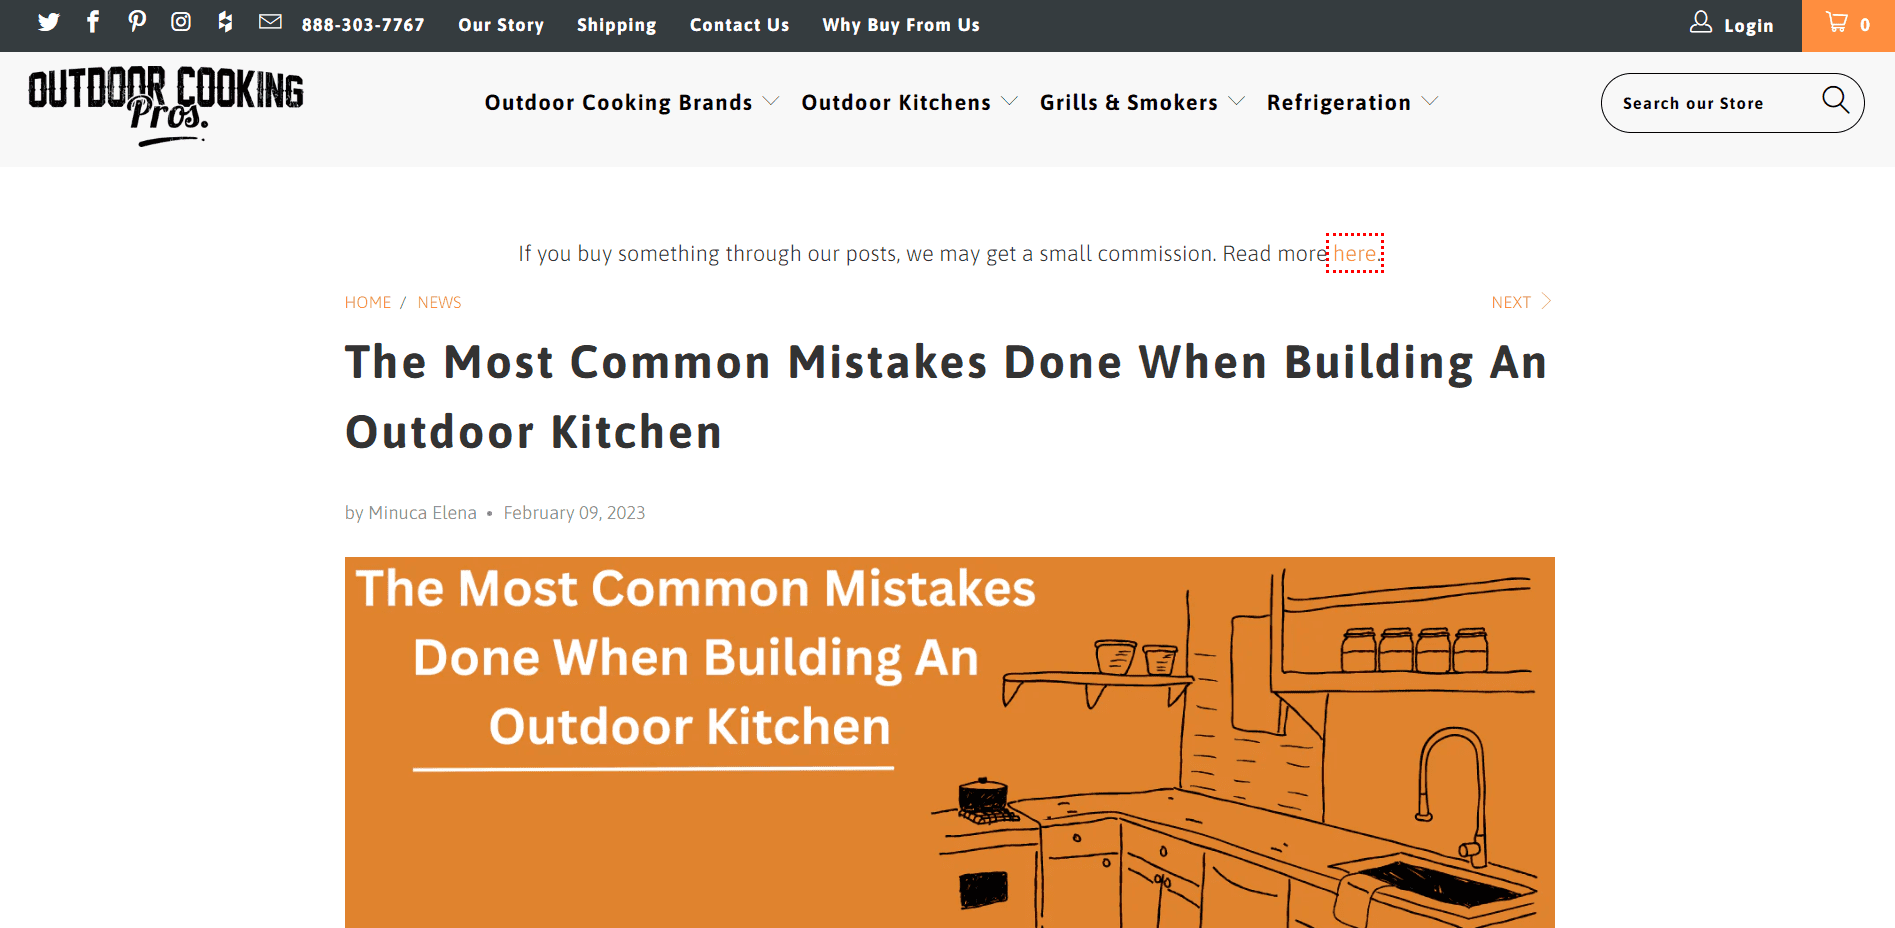 Expert roundup about building an outdoor kitchen